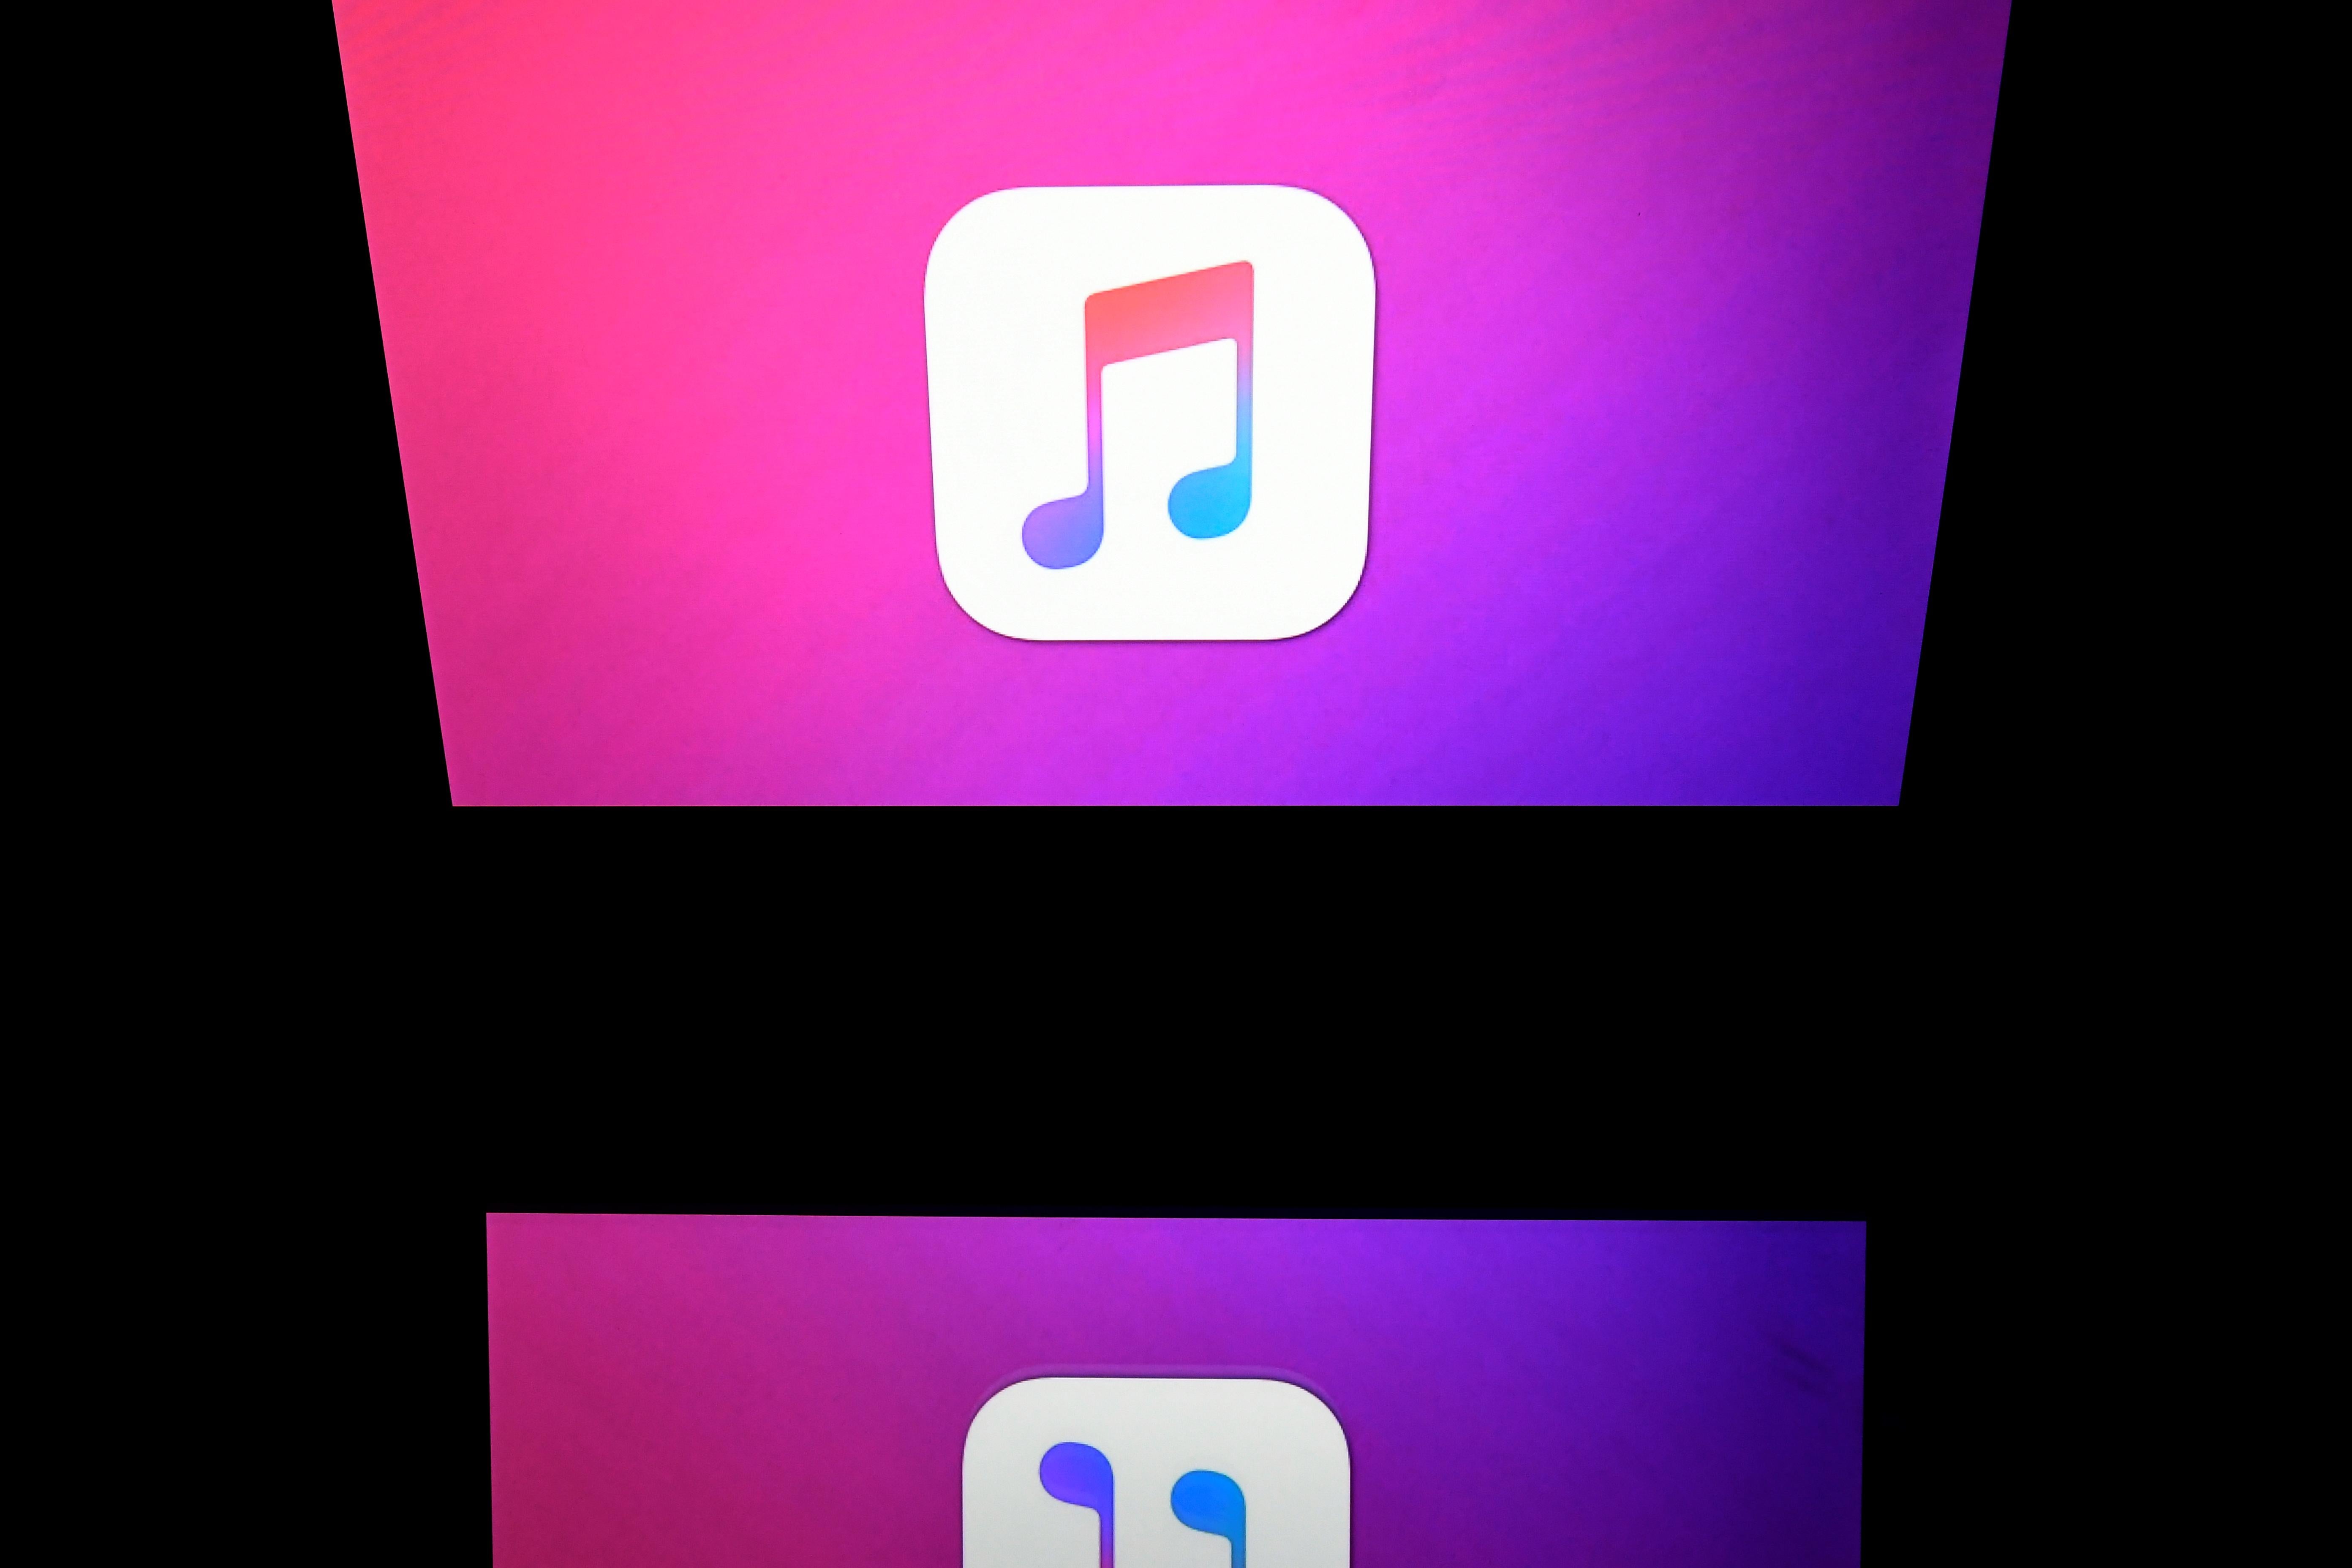 The iTunes logo on a screen onstage.